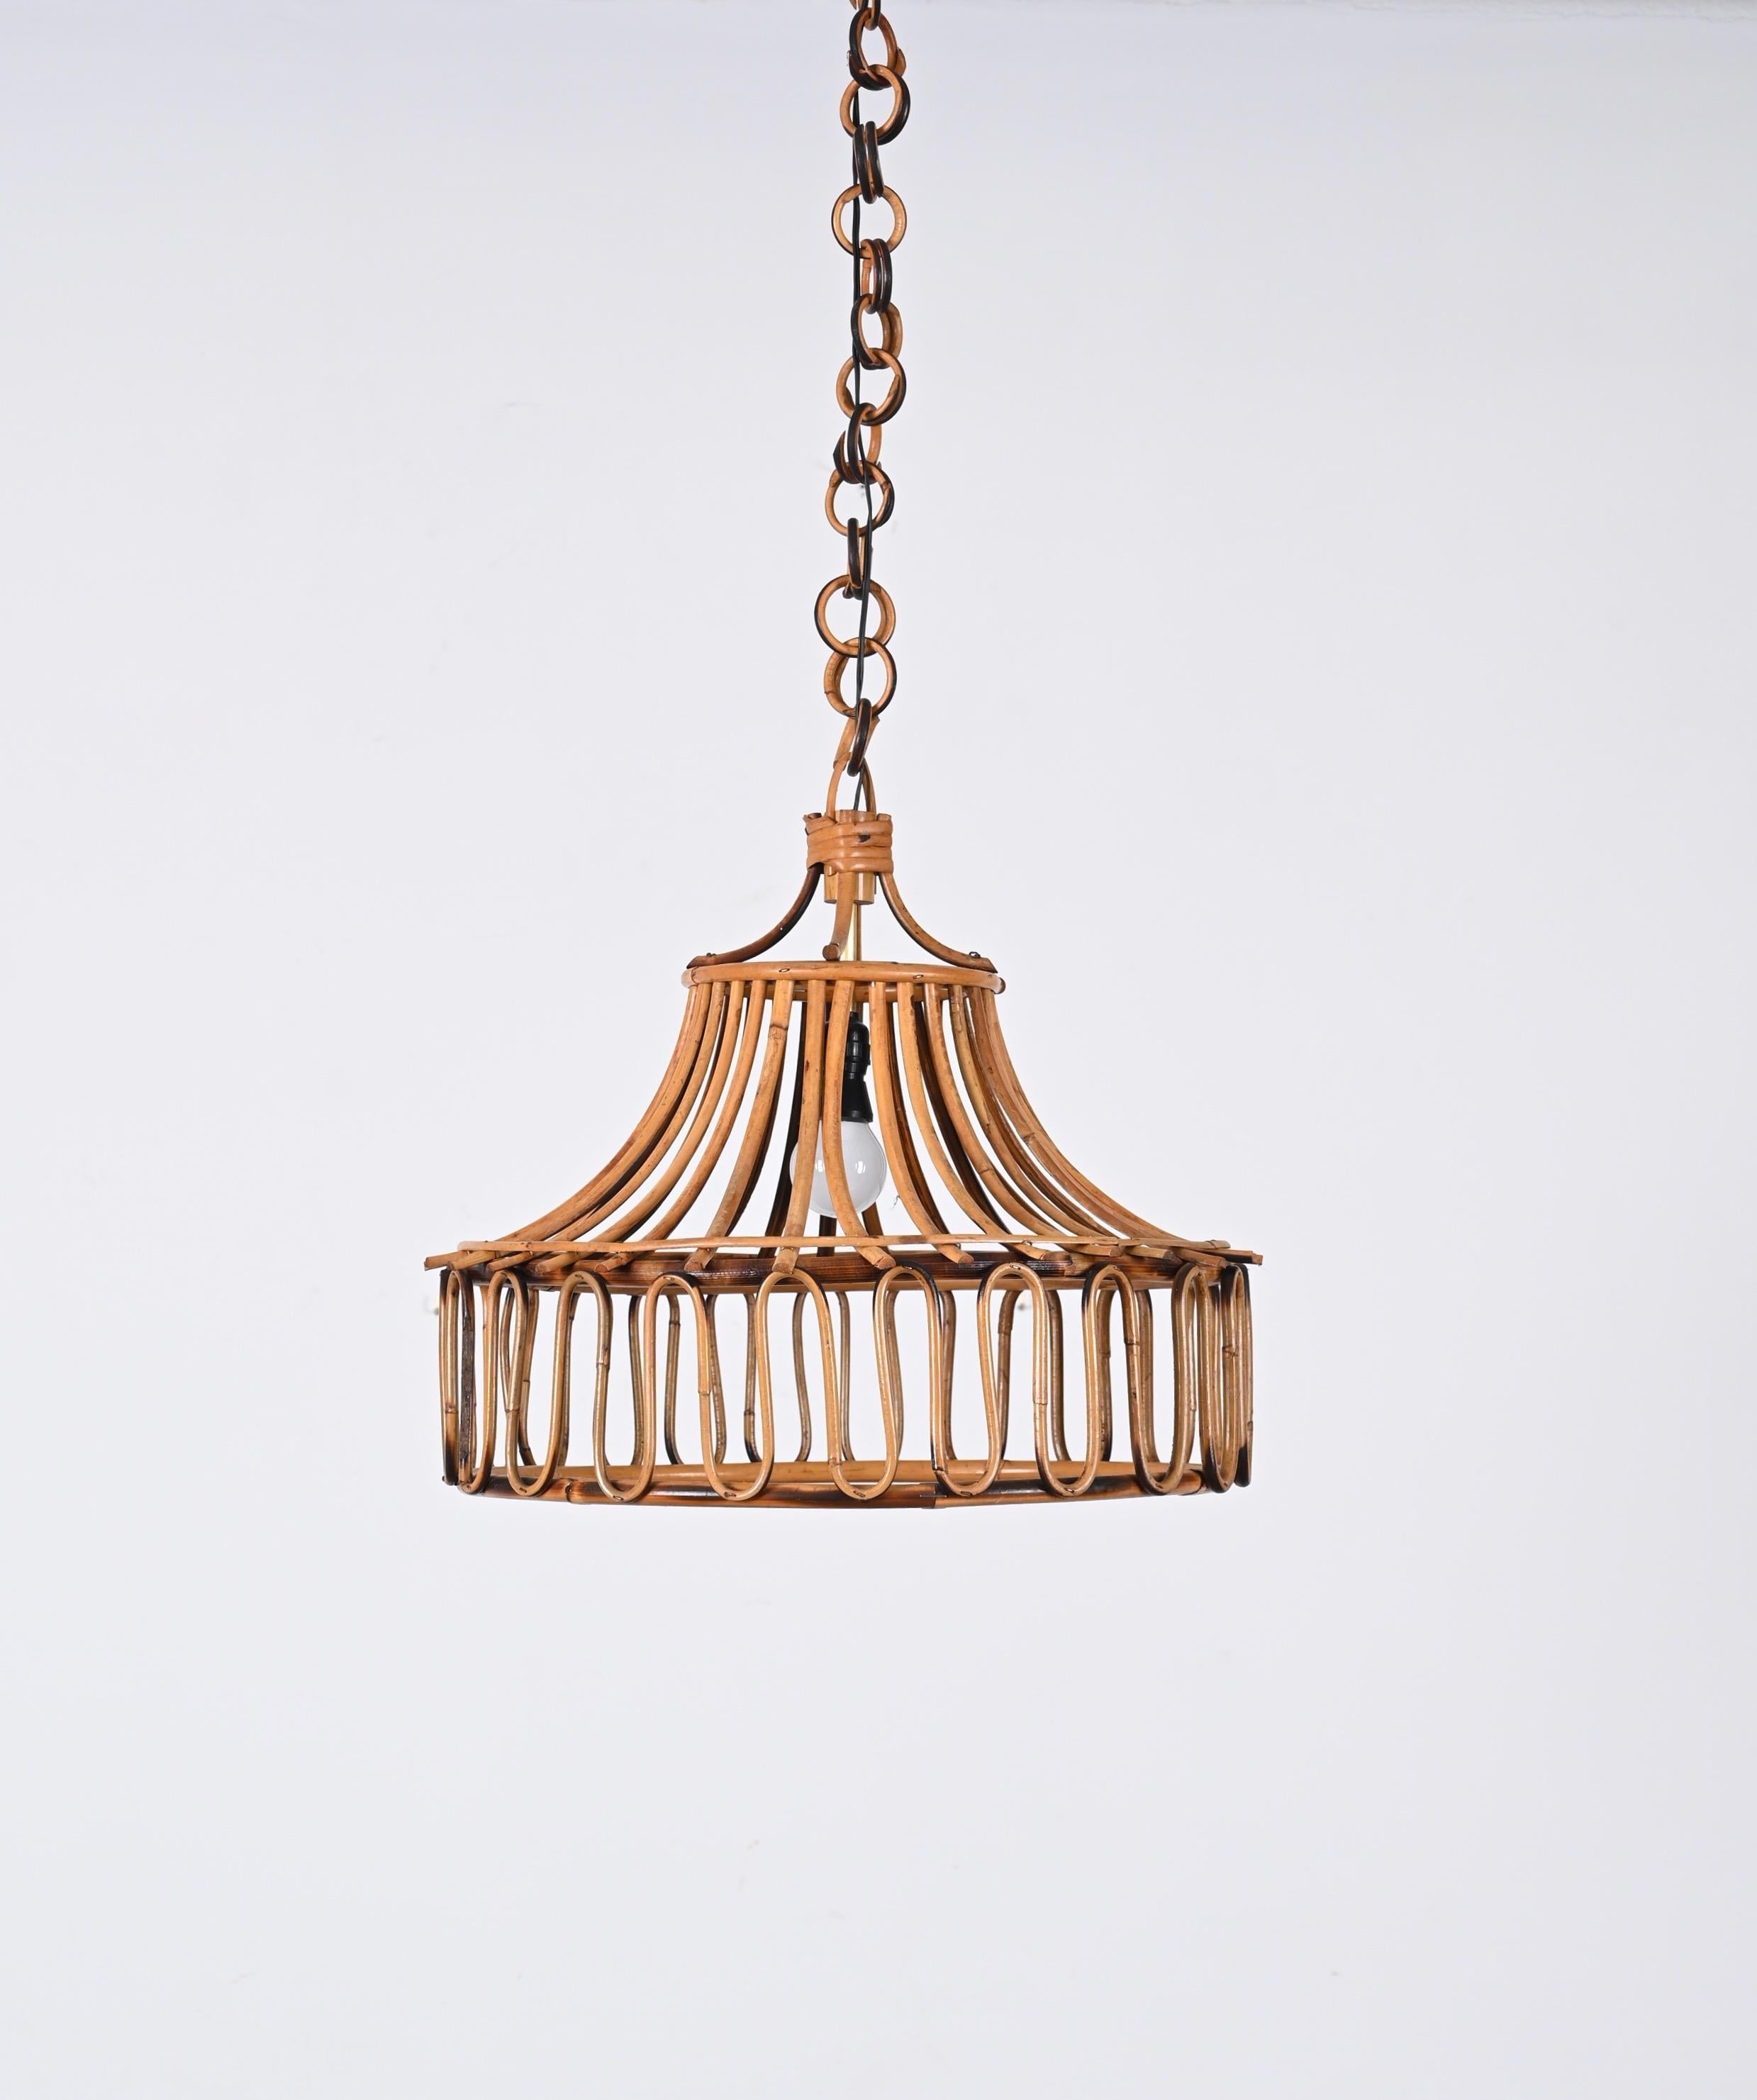 20th Century Midcentury French Riviera Bambo and Rattan Round Italian Chandelier, 1960s For Sale